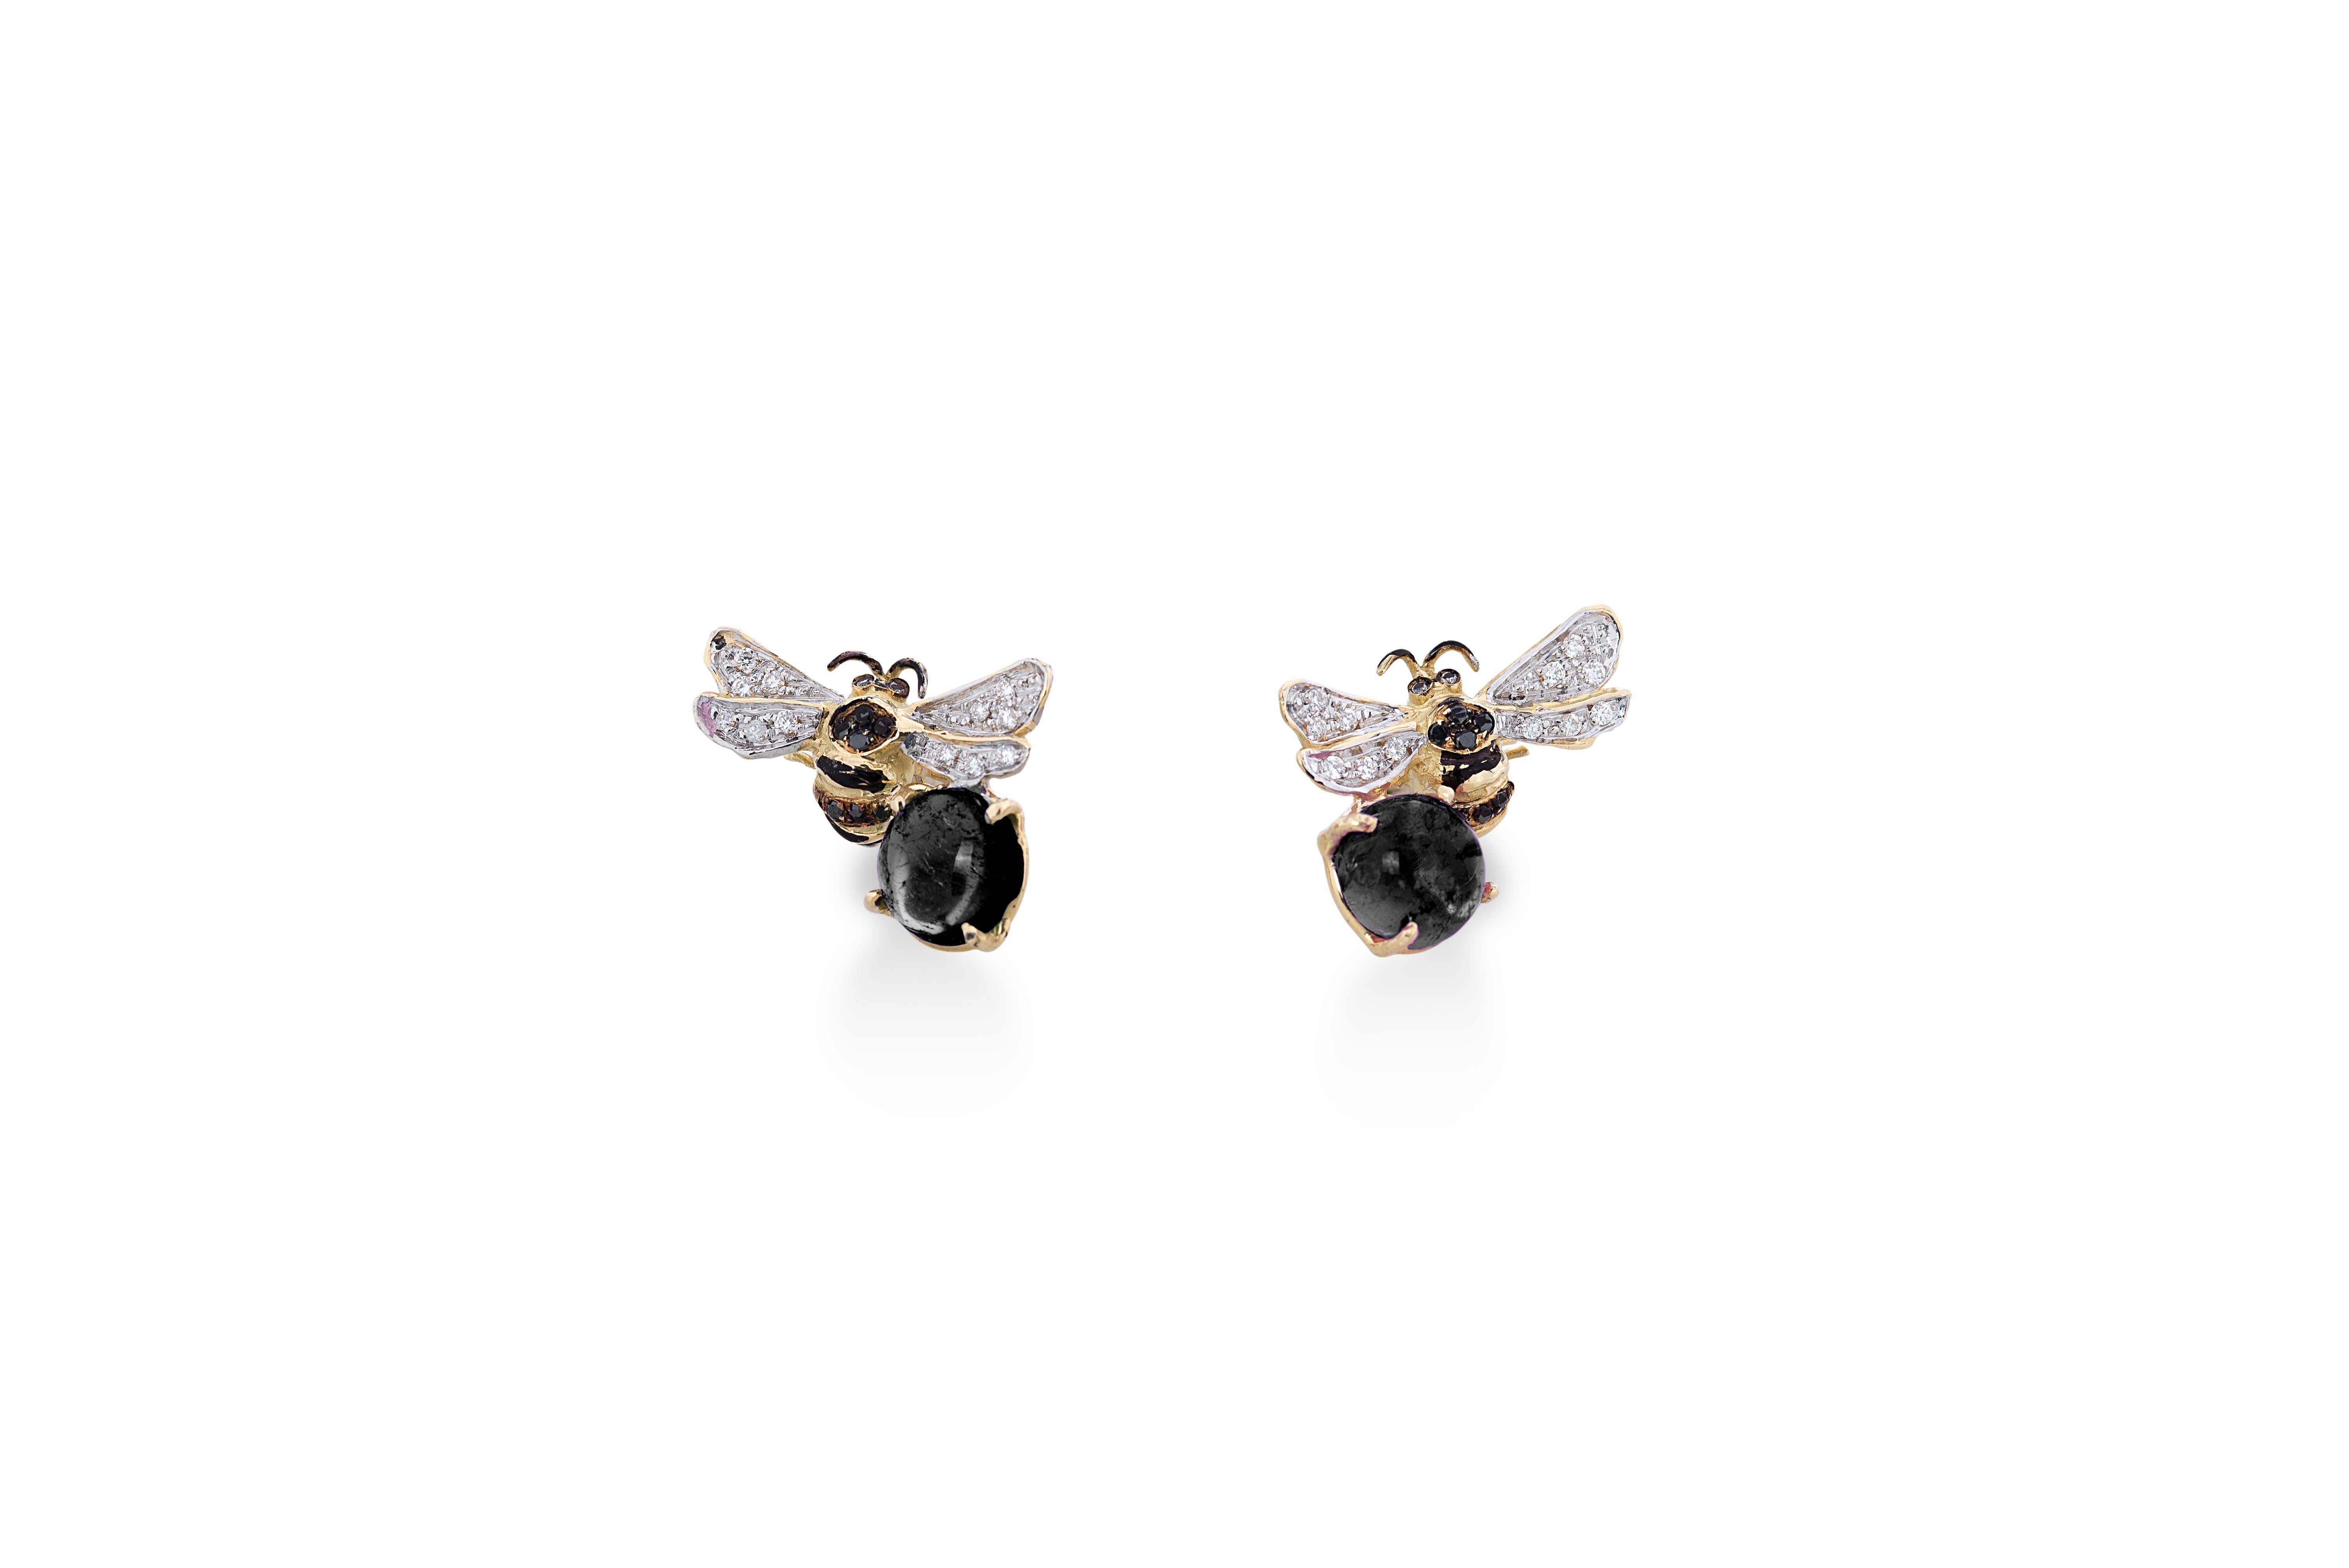 Handcrafted Rossella Ugolini 18 Karat Yellow Gold Onyx 0.16 Karat White Diamond 0.18 Karat Black Diamonds Bees Handcrafted Stud Earrings
Here there is a pair of  Artisanal Bees Stud Earrings handcrafted in 18 Karats Yellow Gold and adorned with a